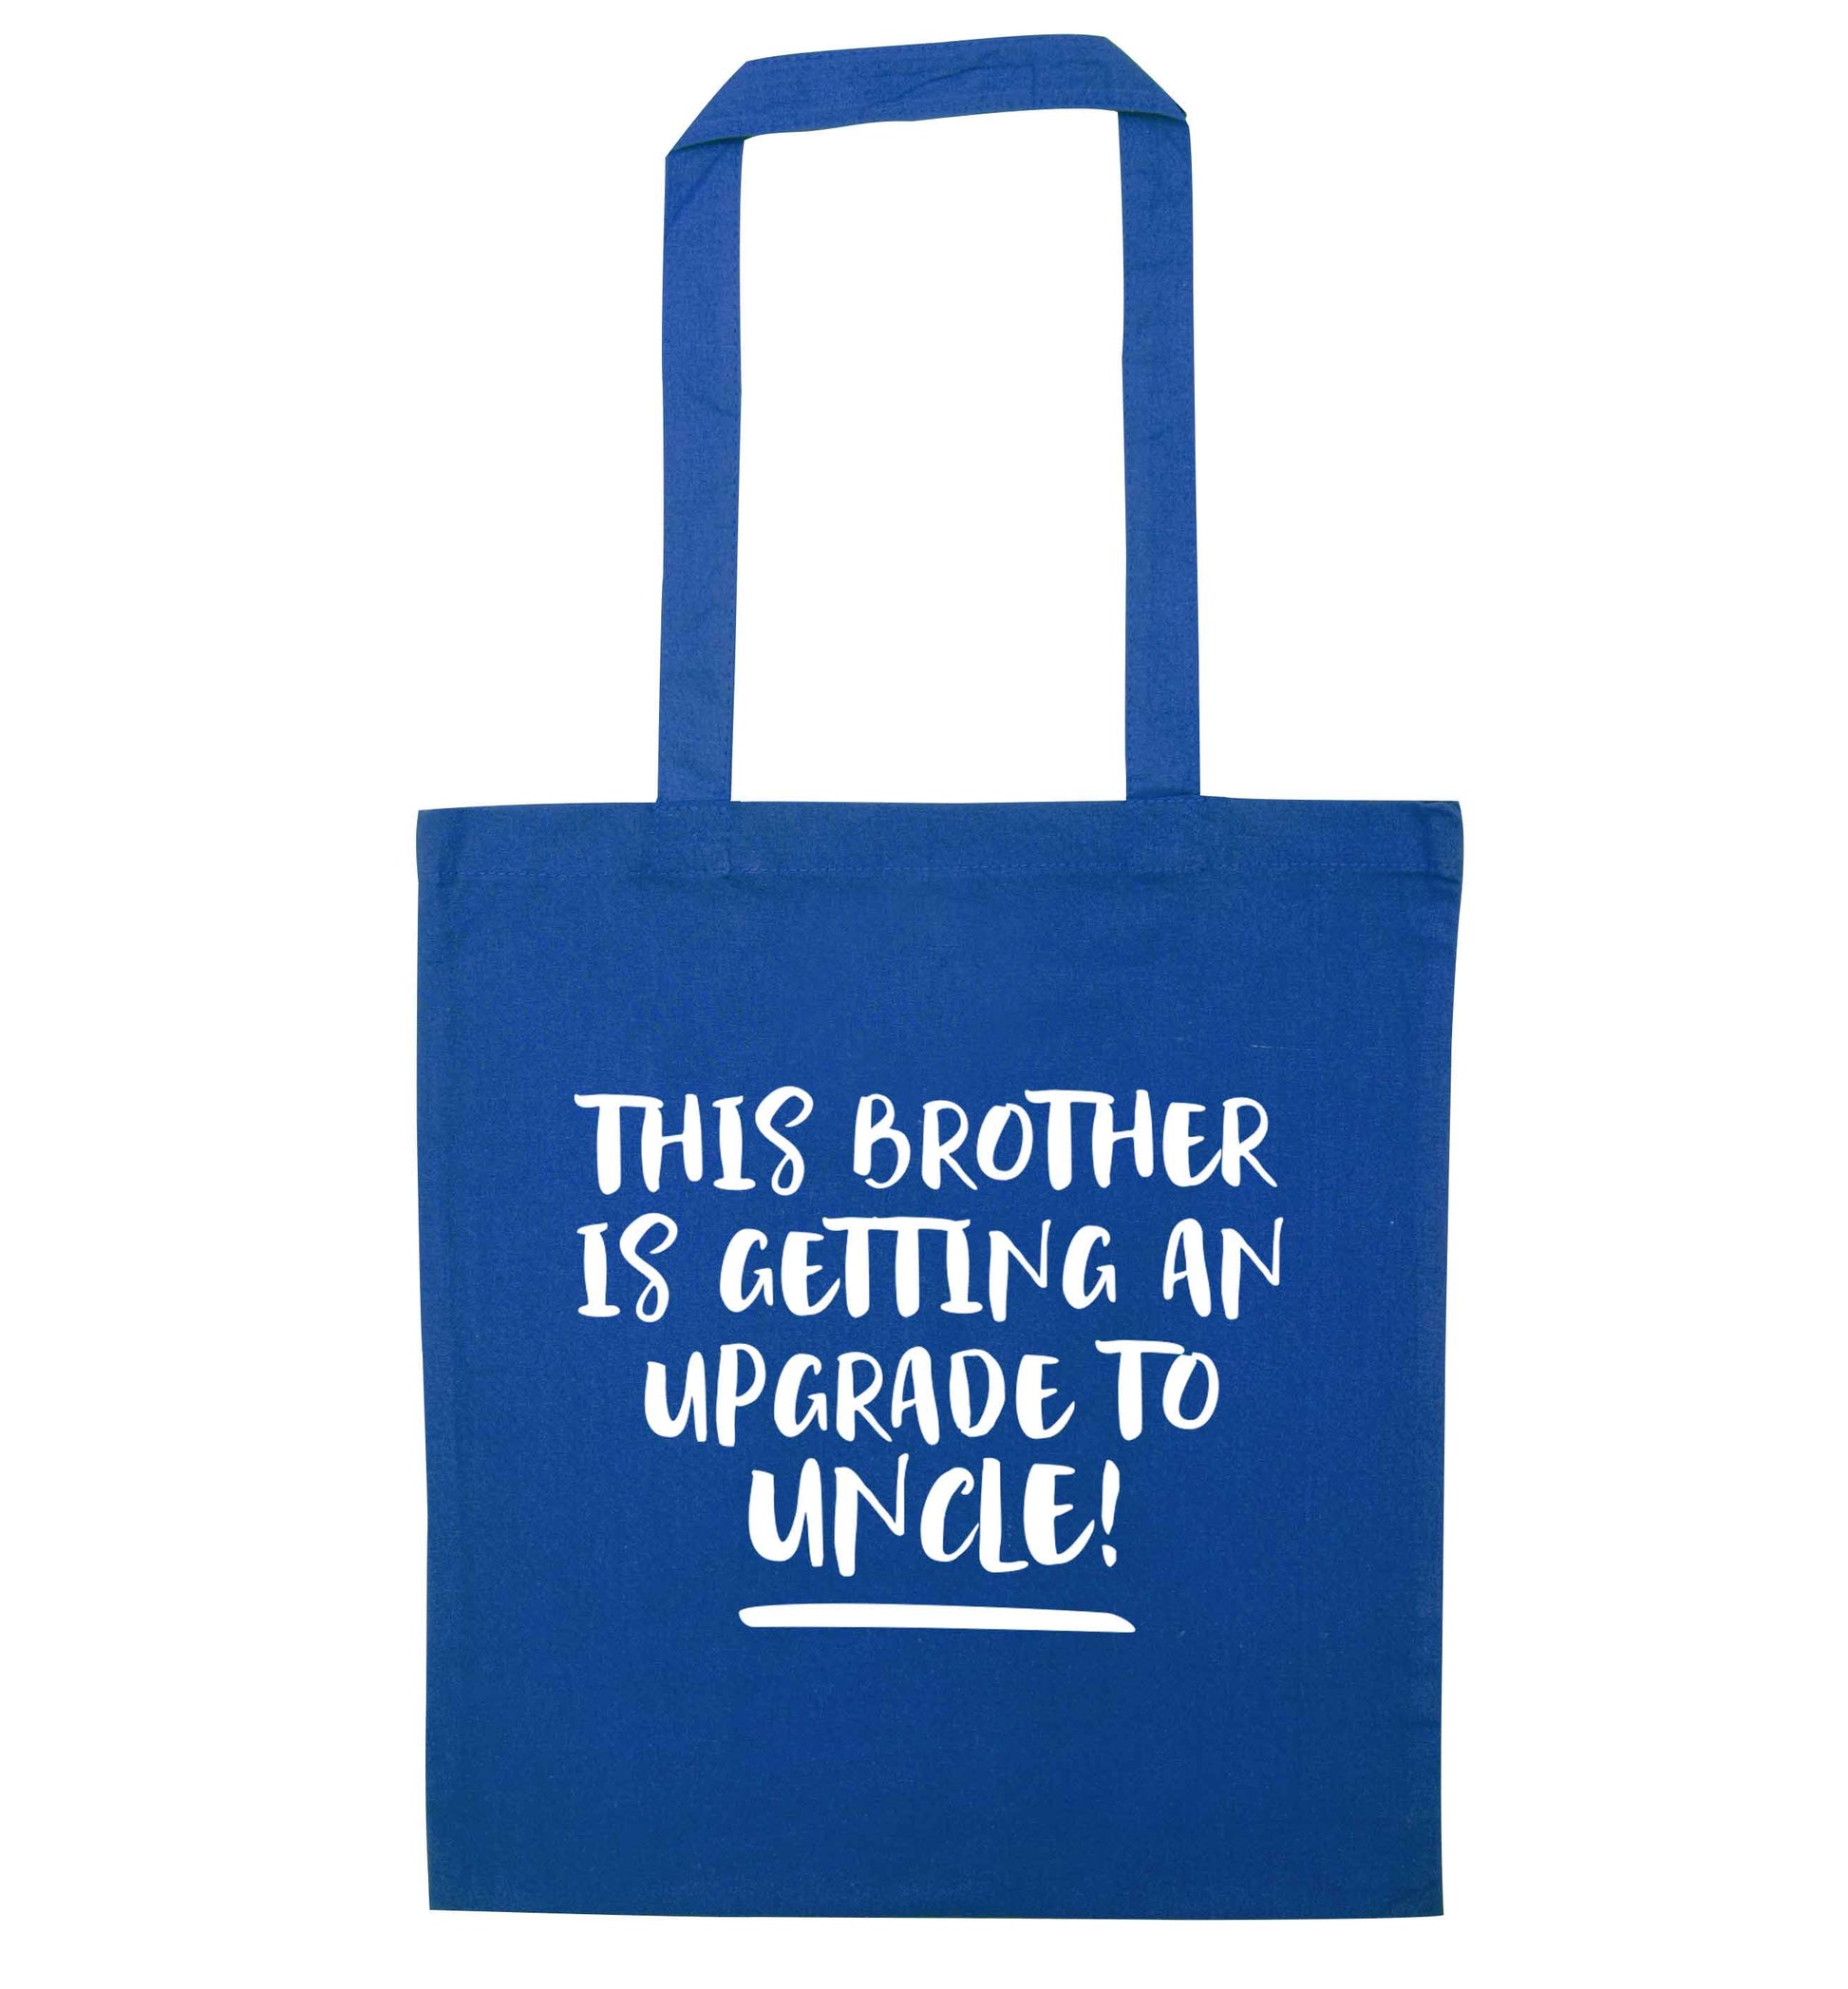 This brother is getting an upgrade to uncle! blue tote bag